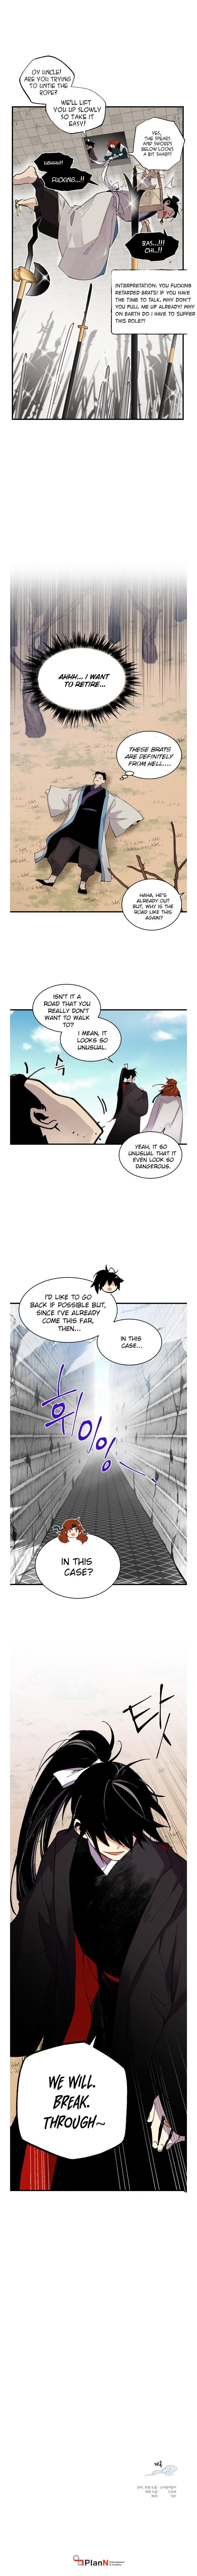 Lightning Degree - Chapter 75 Page 10